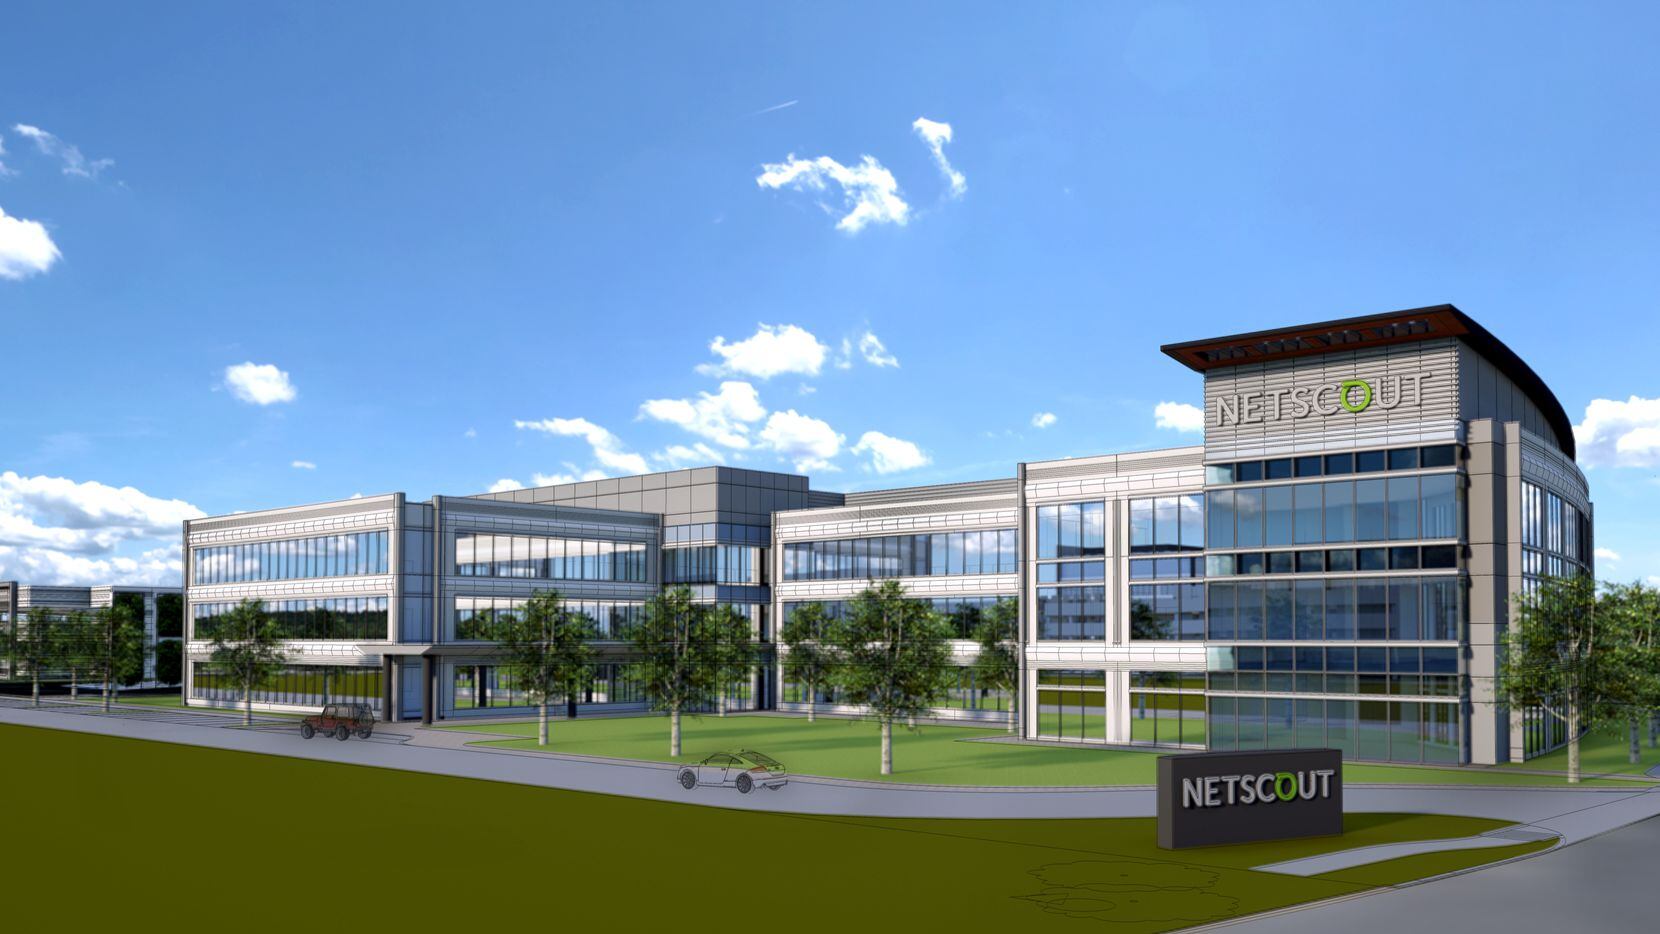 About 500 people will work in NetScout's new Allen campus.